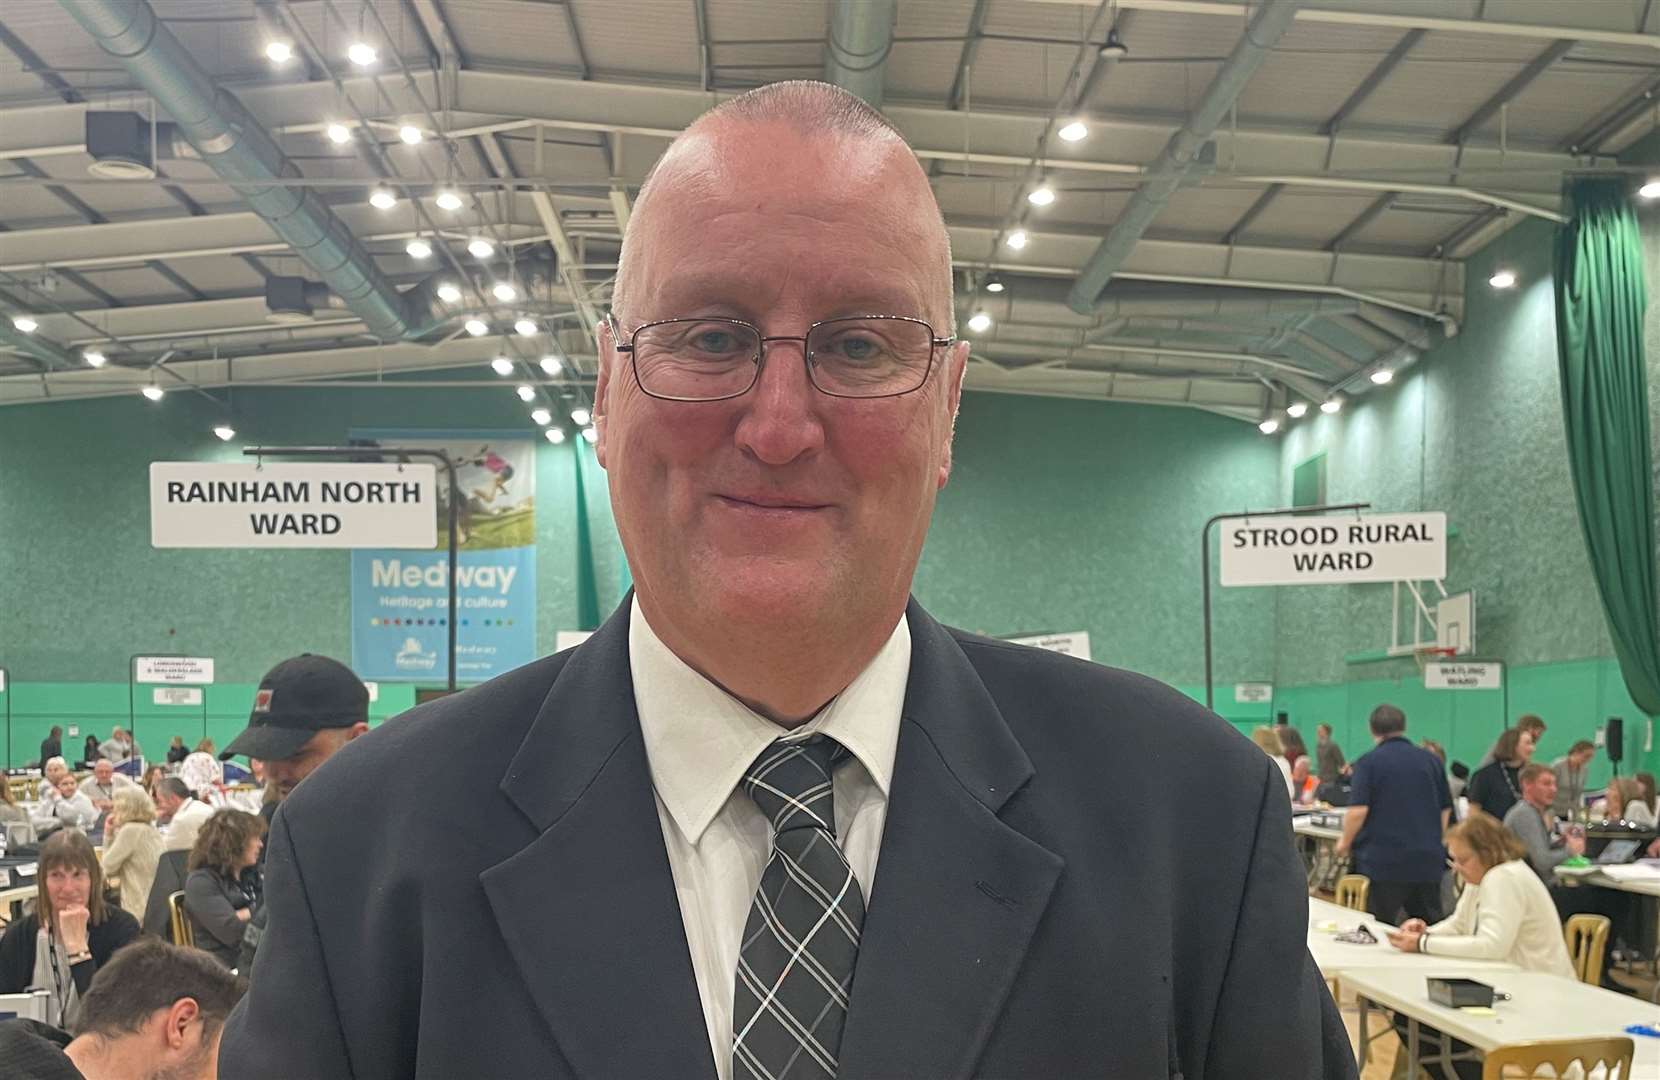 Independent councillor Chris Spalding dedicated his victory to former councillor Mike Pendergast, who died in 2022